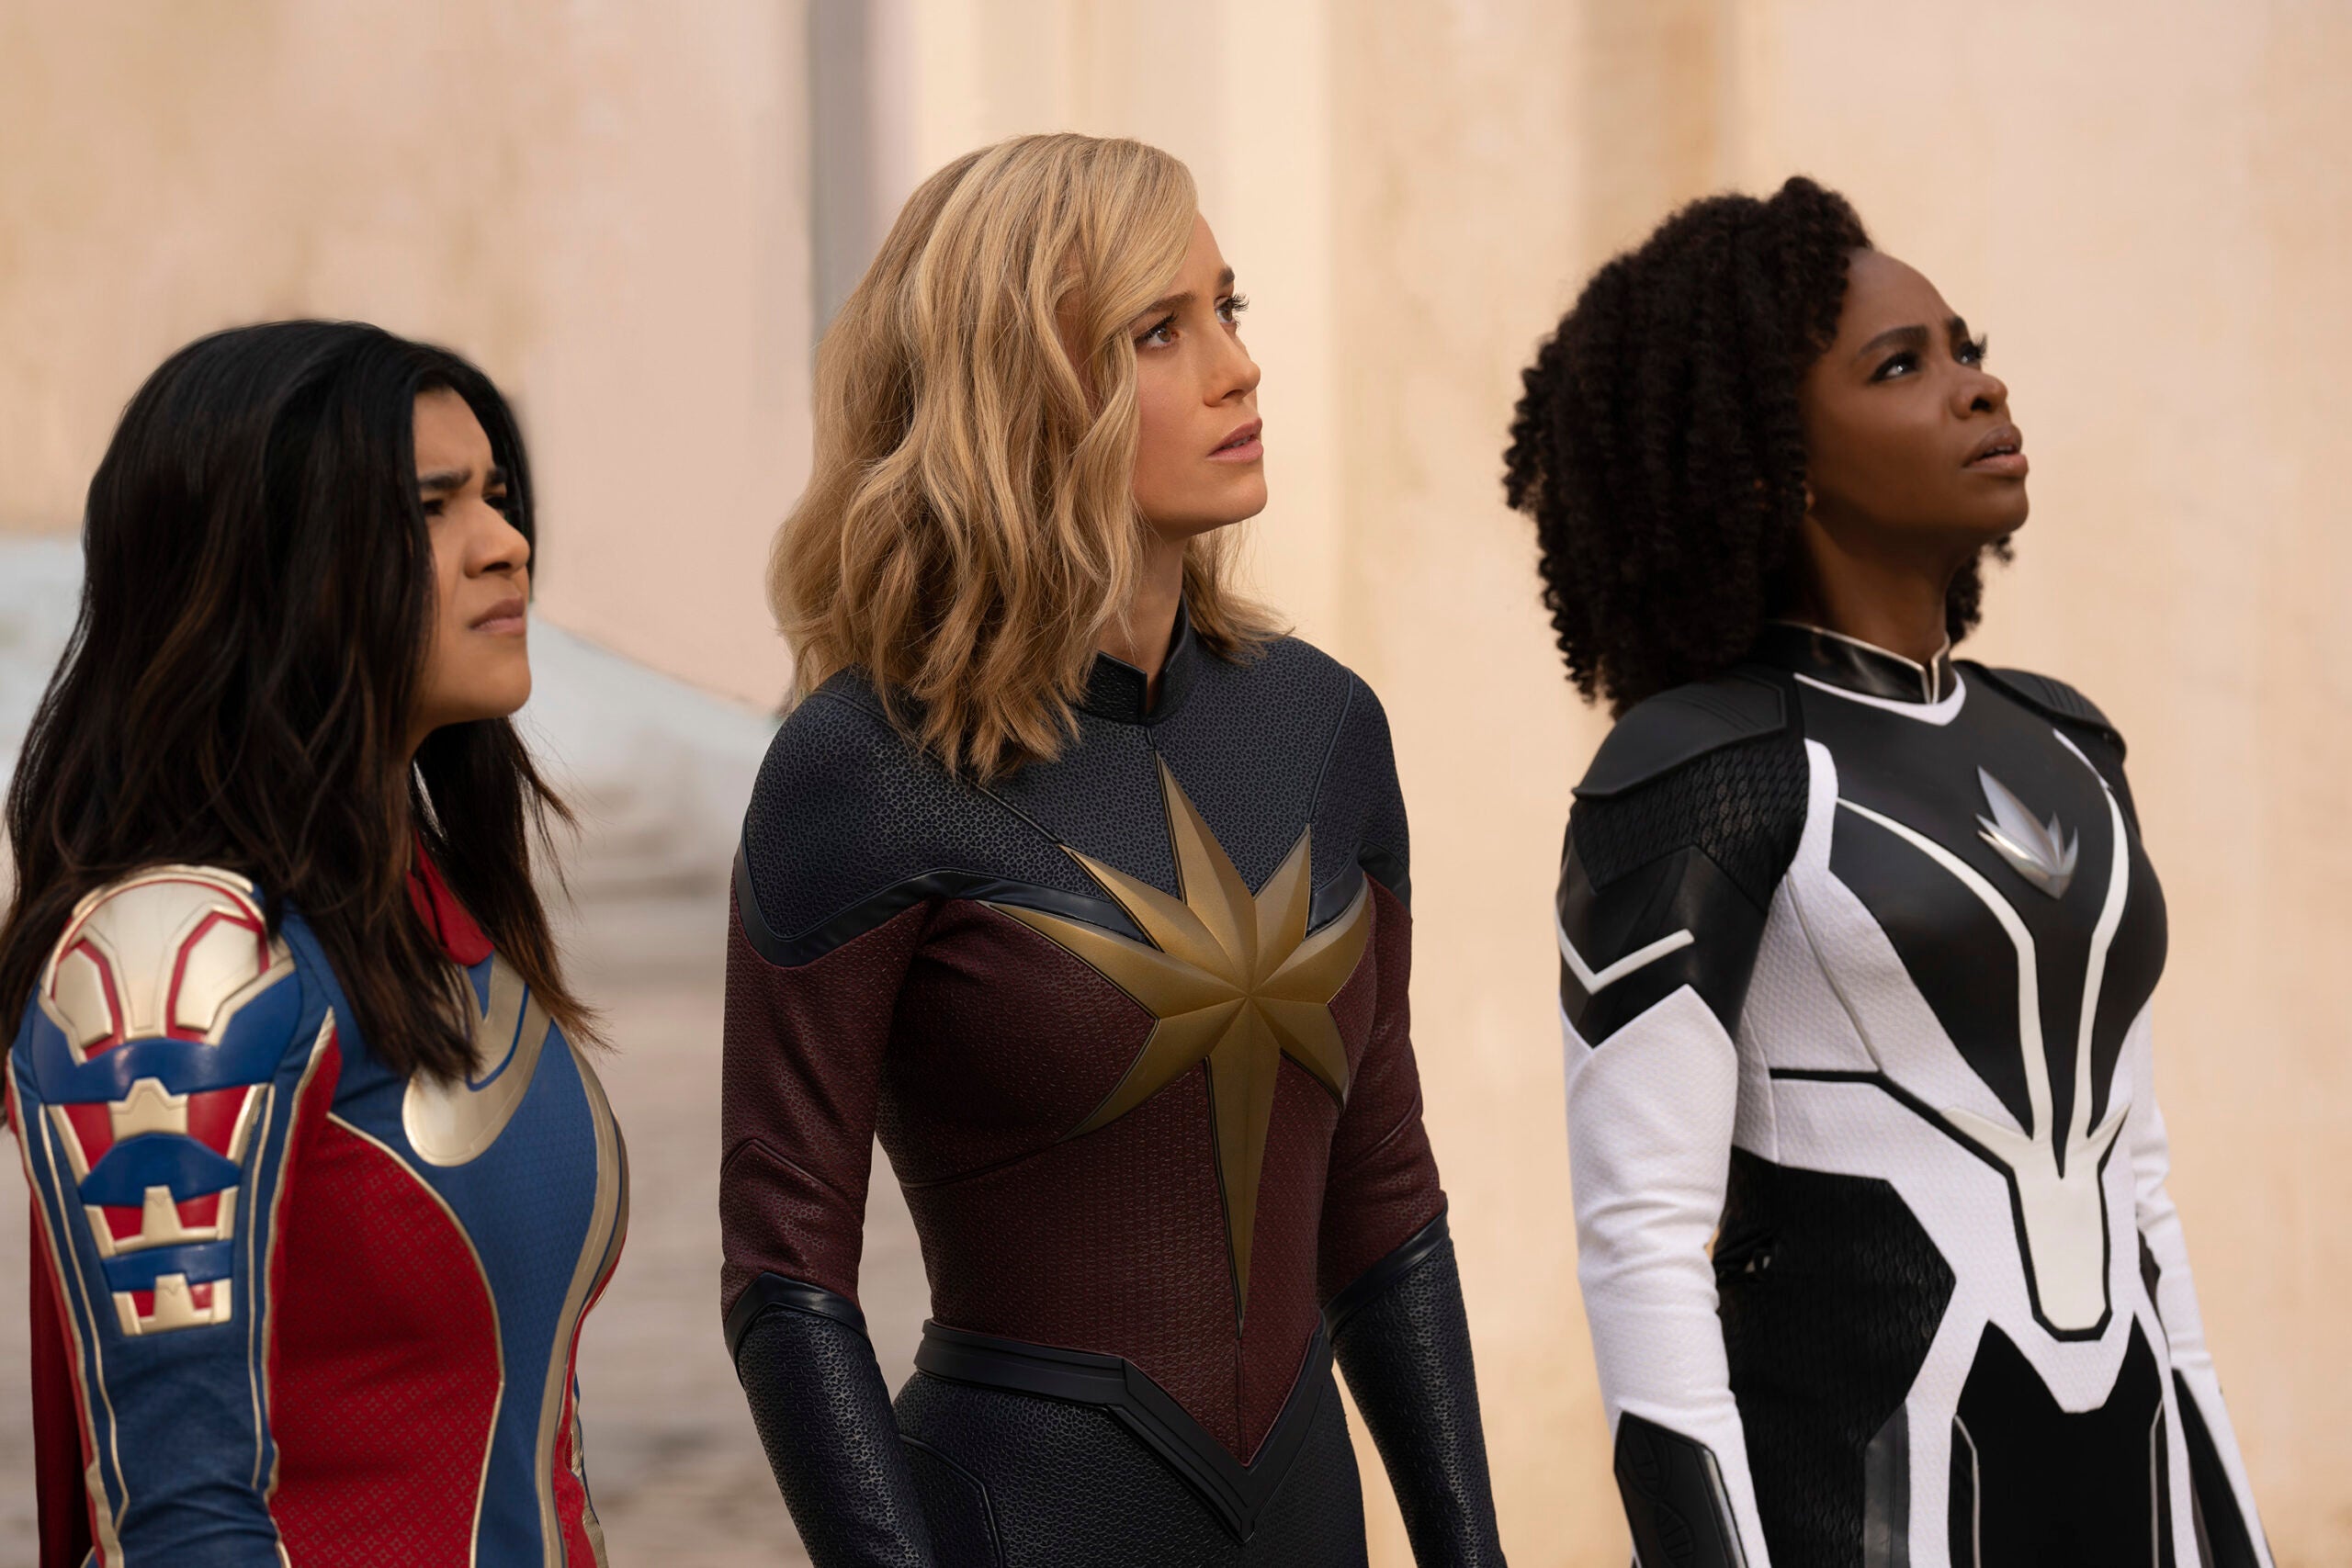 This image released by Disney shows, from left, Iman Vellani as Ms. Marvel, Brie Larson as Captain Marvel, and Teyonah Parris as Captain Monica Rambeau in a scene from "The Marvels."